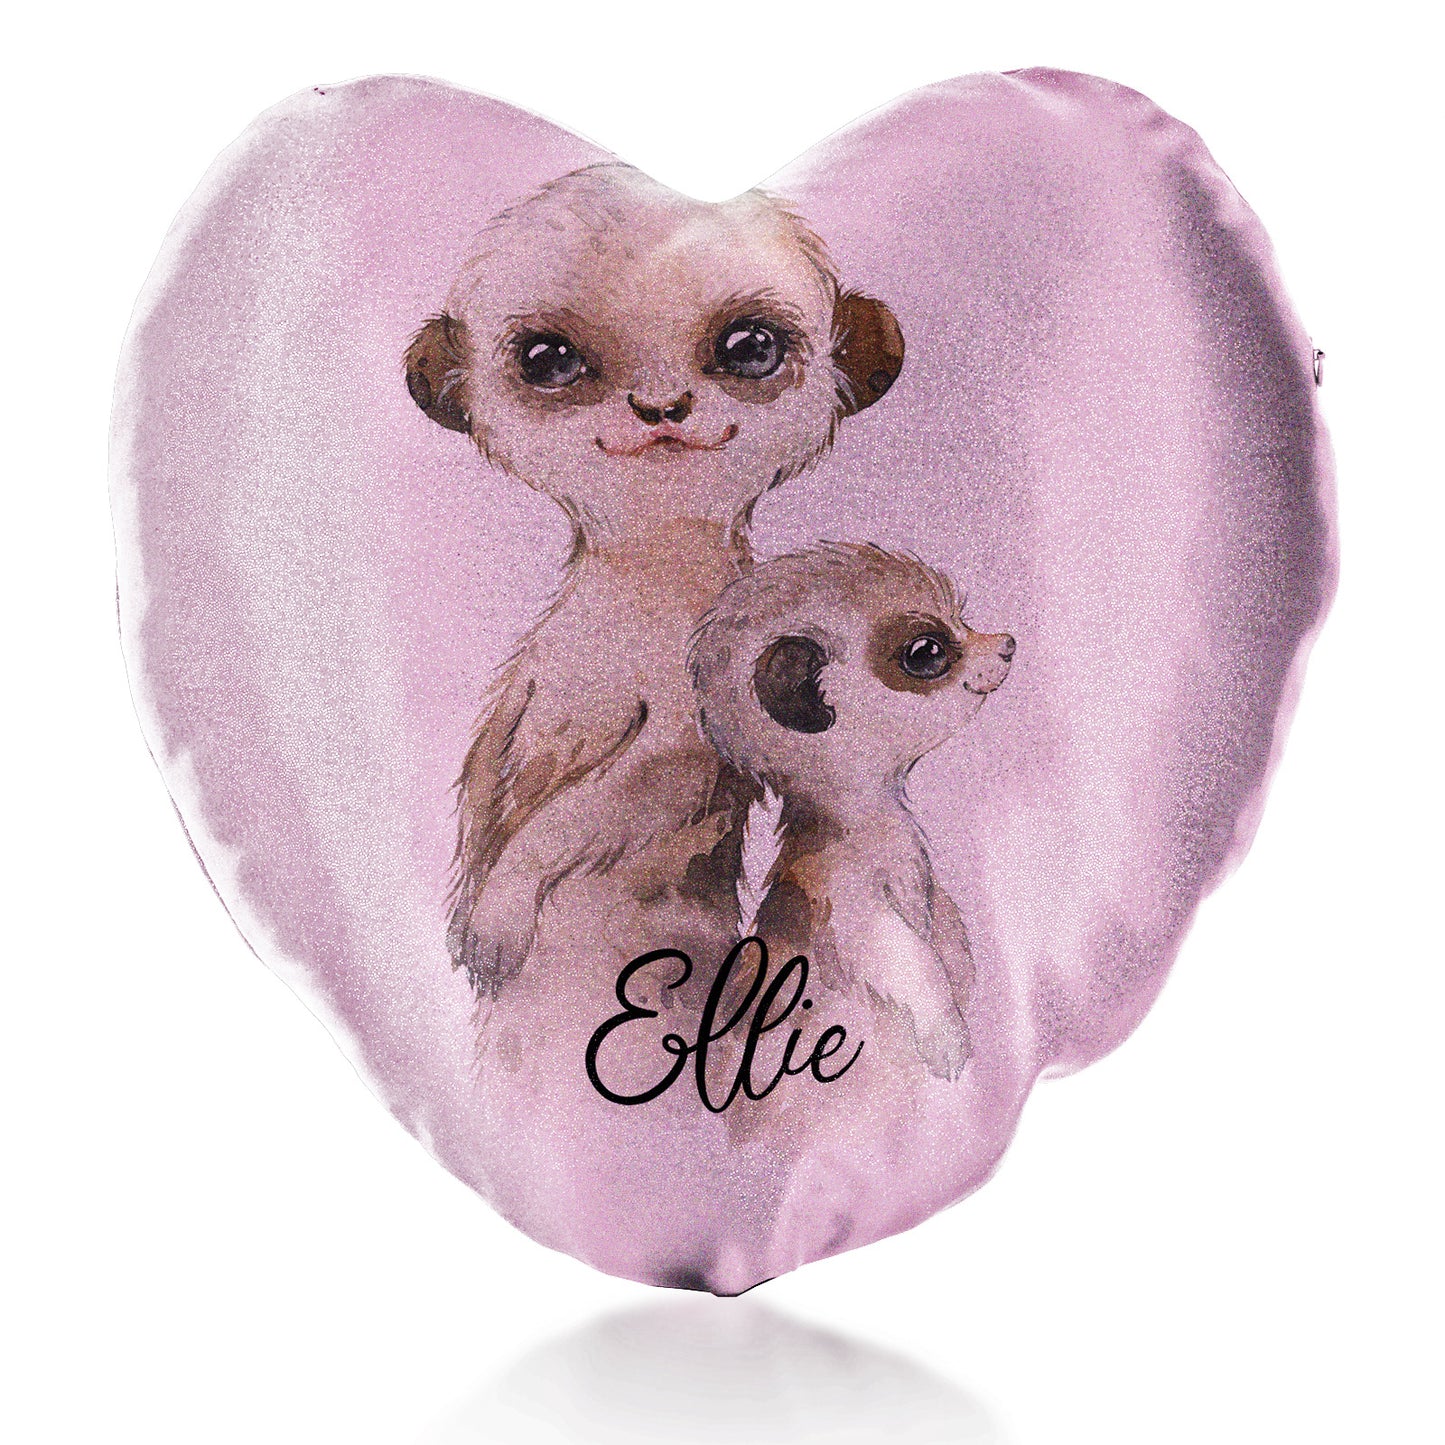 Personalised Glitter Heart Cushion with Meerkat Baby and Adult and Cute Text